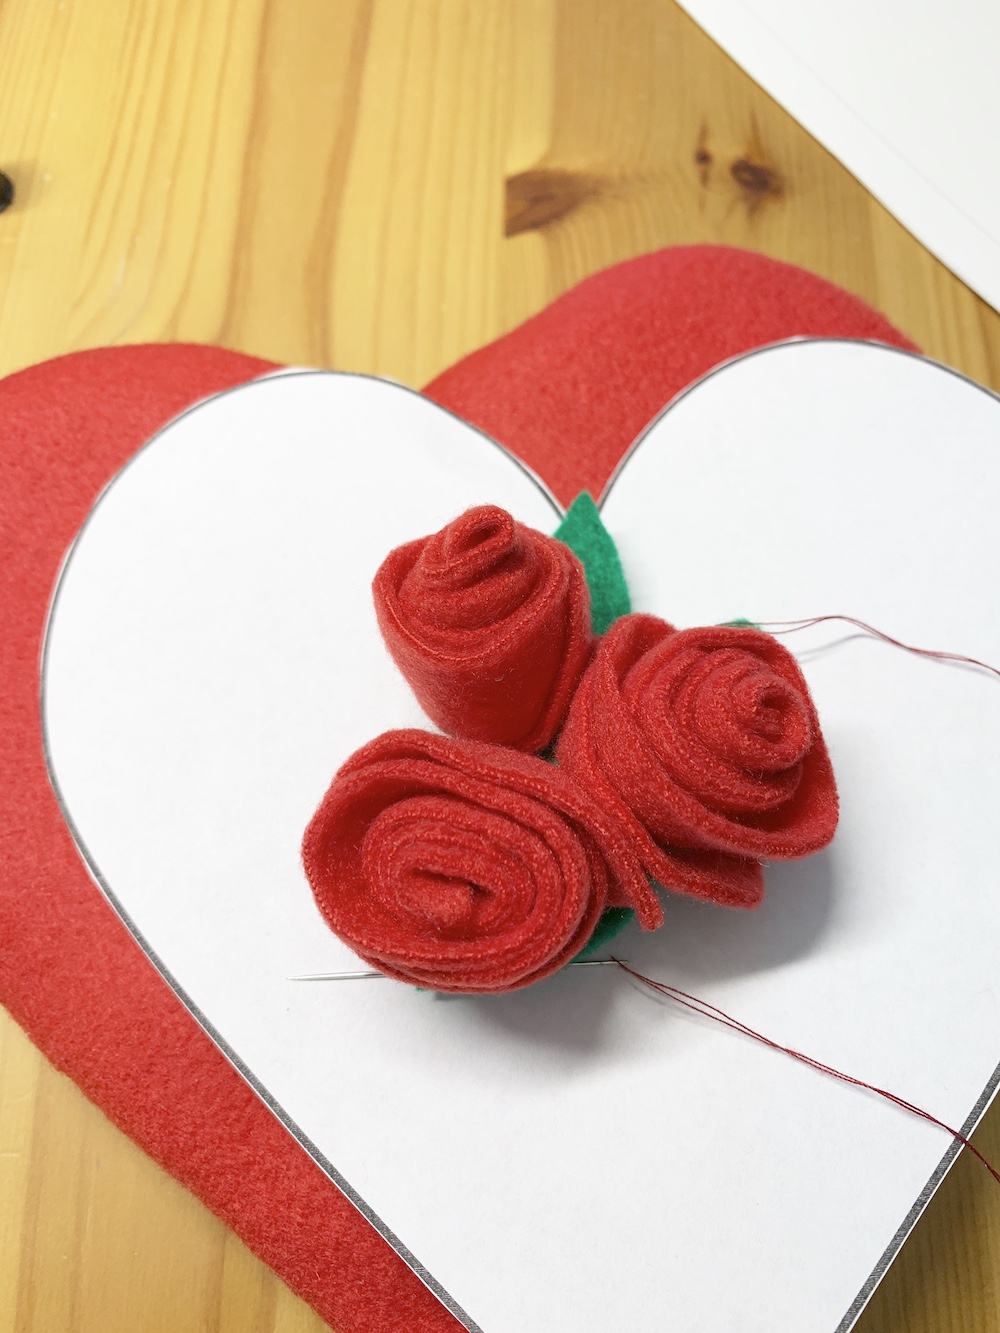 Make a Heart with Mini Rosettes Sew Three Rosettes Together #ValentinesDay #ValentineHeart #DIY #Decor #DIYDecor #DIYValentineDecor #ValentineHeartwithRosettes #HeartwithRosettes #DIYValentineHeart